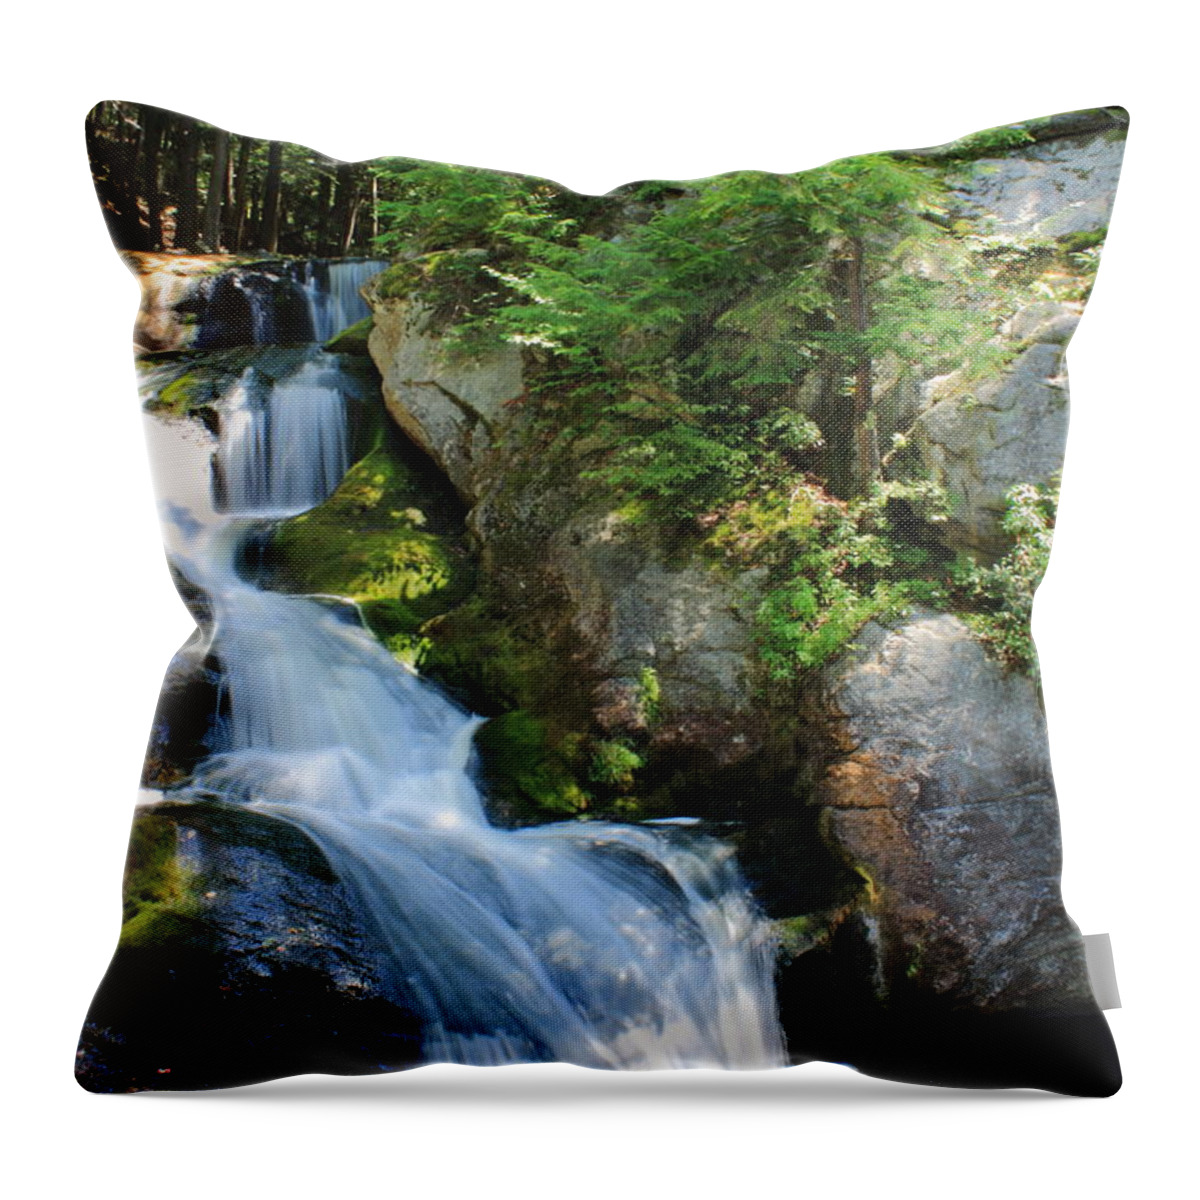 Doane's Falls Throw Pillow featuring the photograph Doane's Falls 2 by Jeff Heimlich